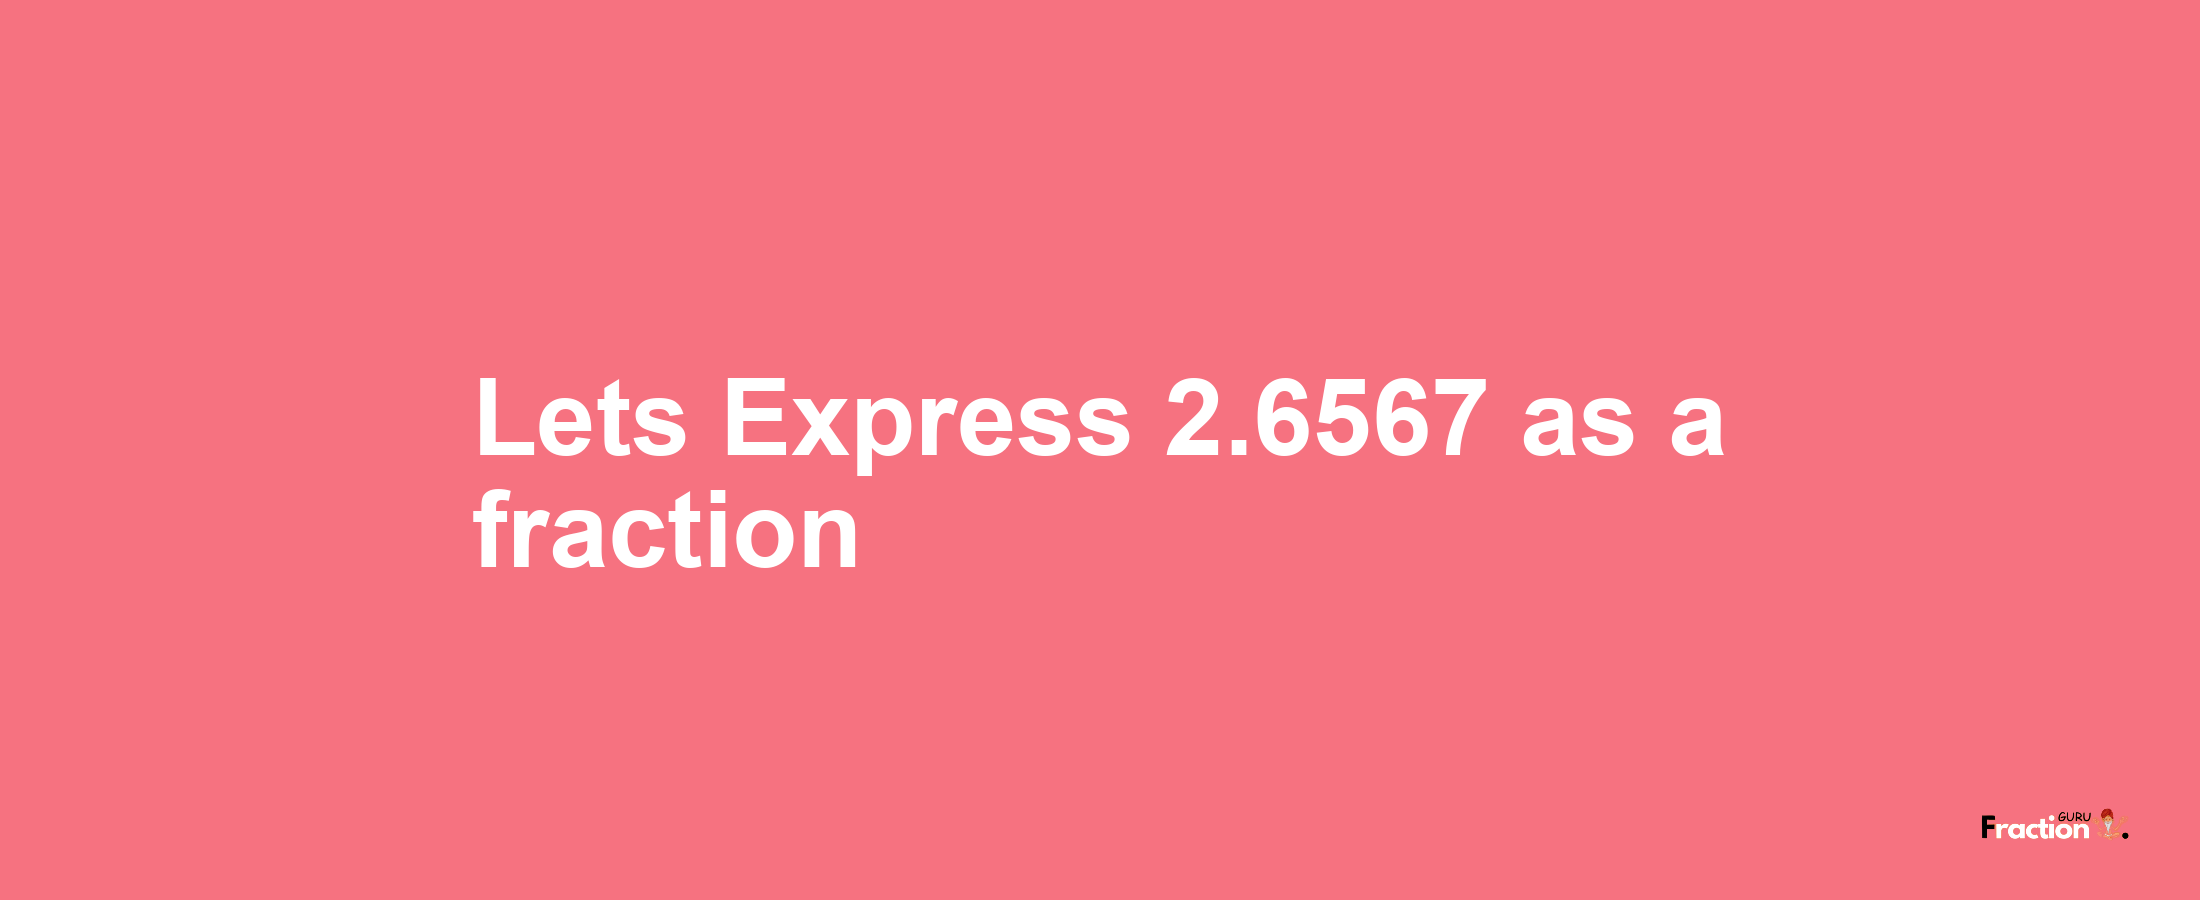 Lets Express 2.6567 as afraction